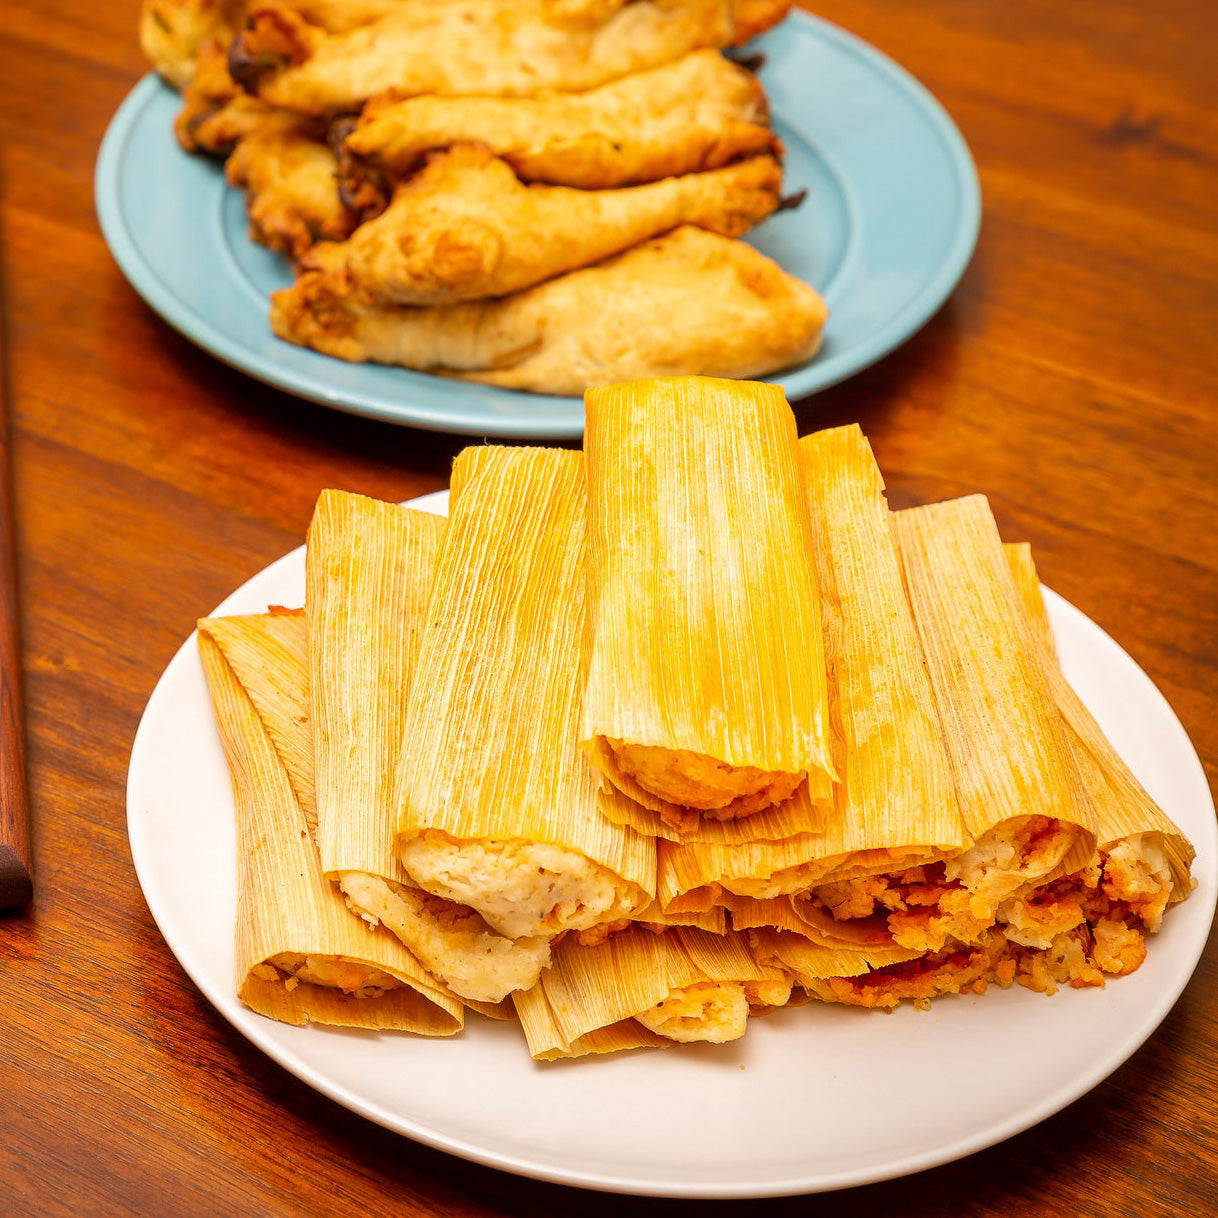 A plate of golden-brown Hatch Green Chile Veggie Tamales neatly stacked, served alongside a dish of empanadas on a wooden table.